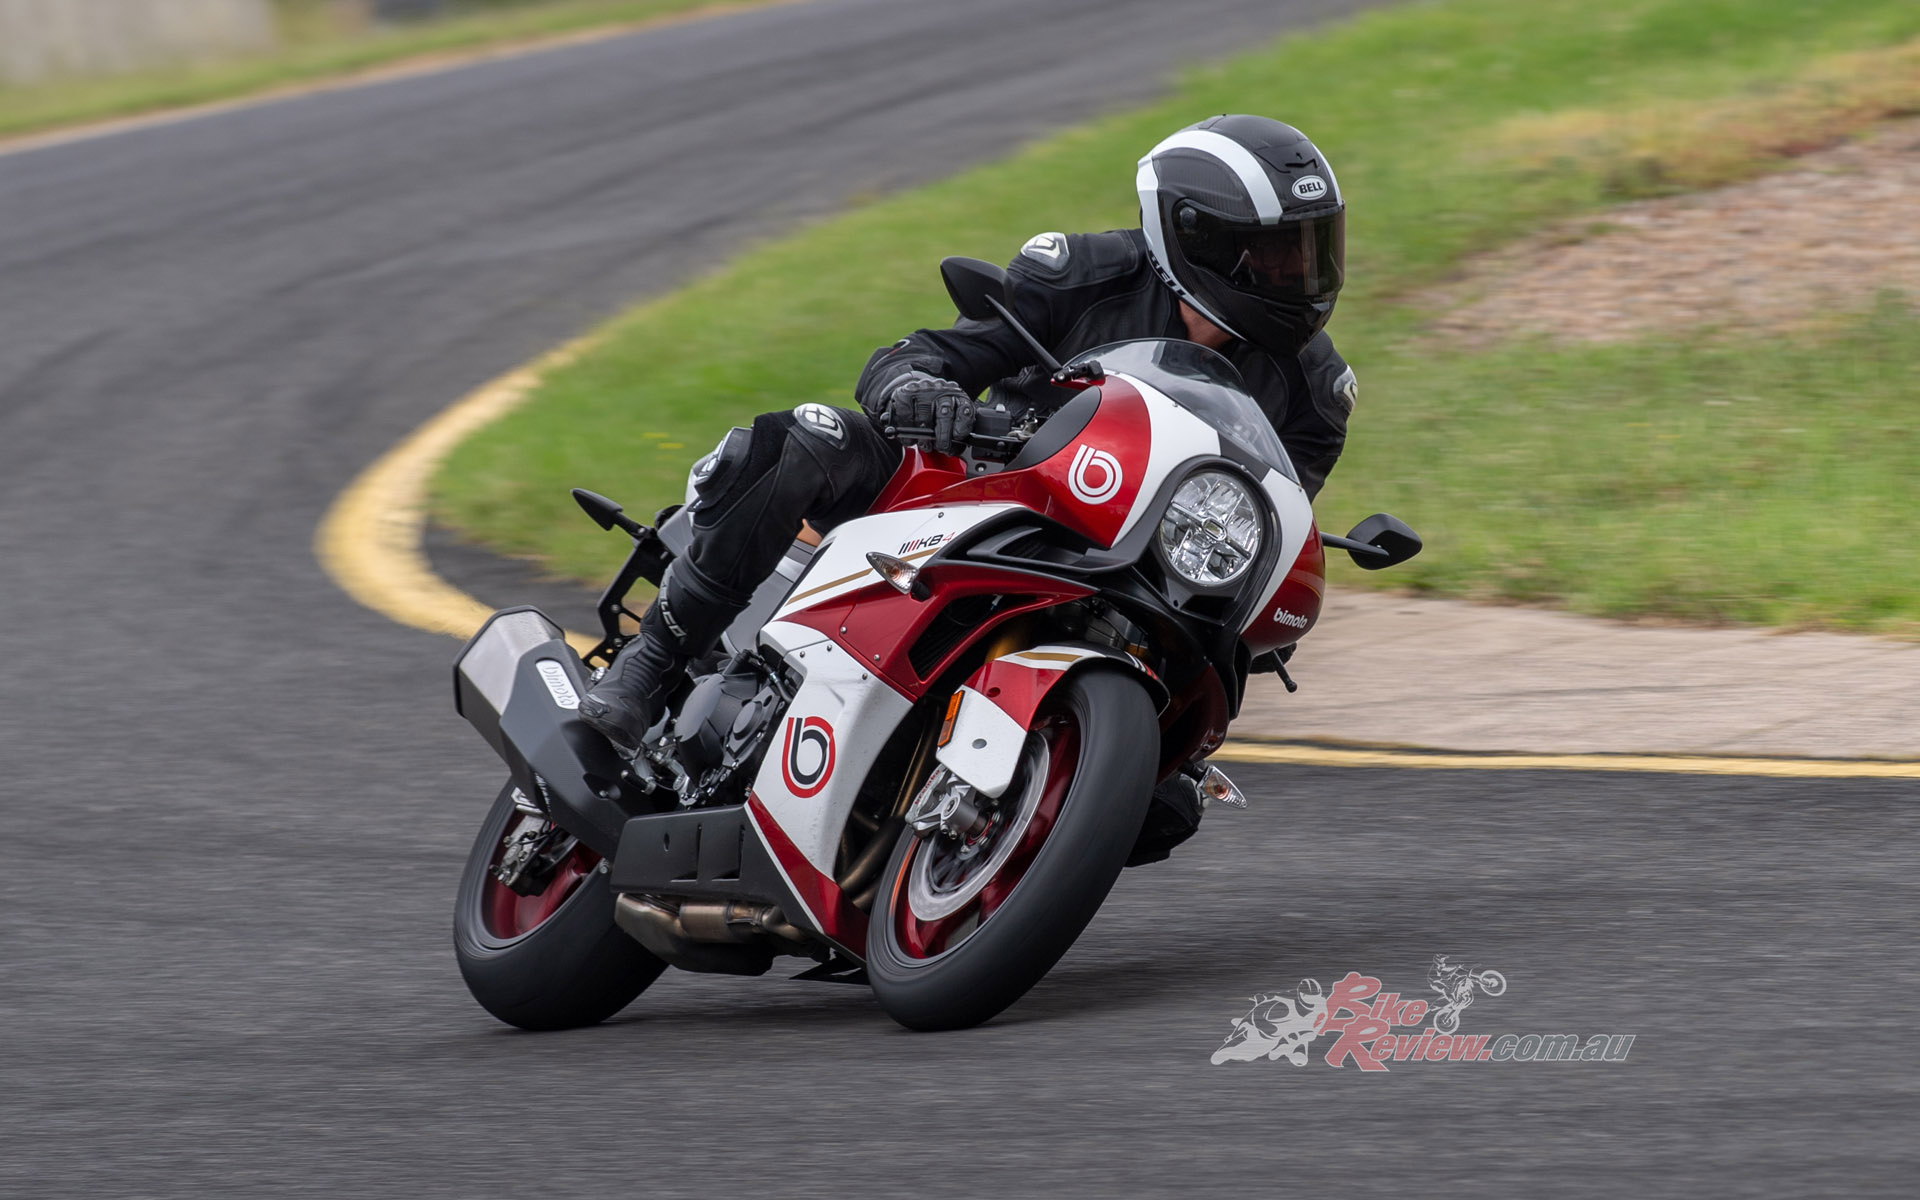 "Heading into the first set of tight corners the KB4 turns fast and precise and feels more like a 600 sportsbike"...